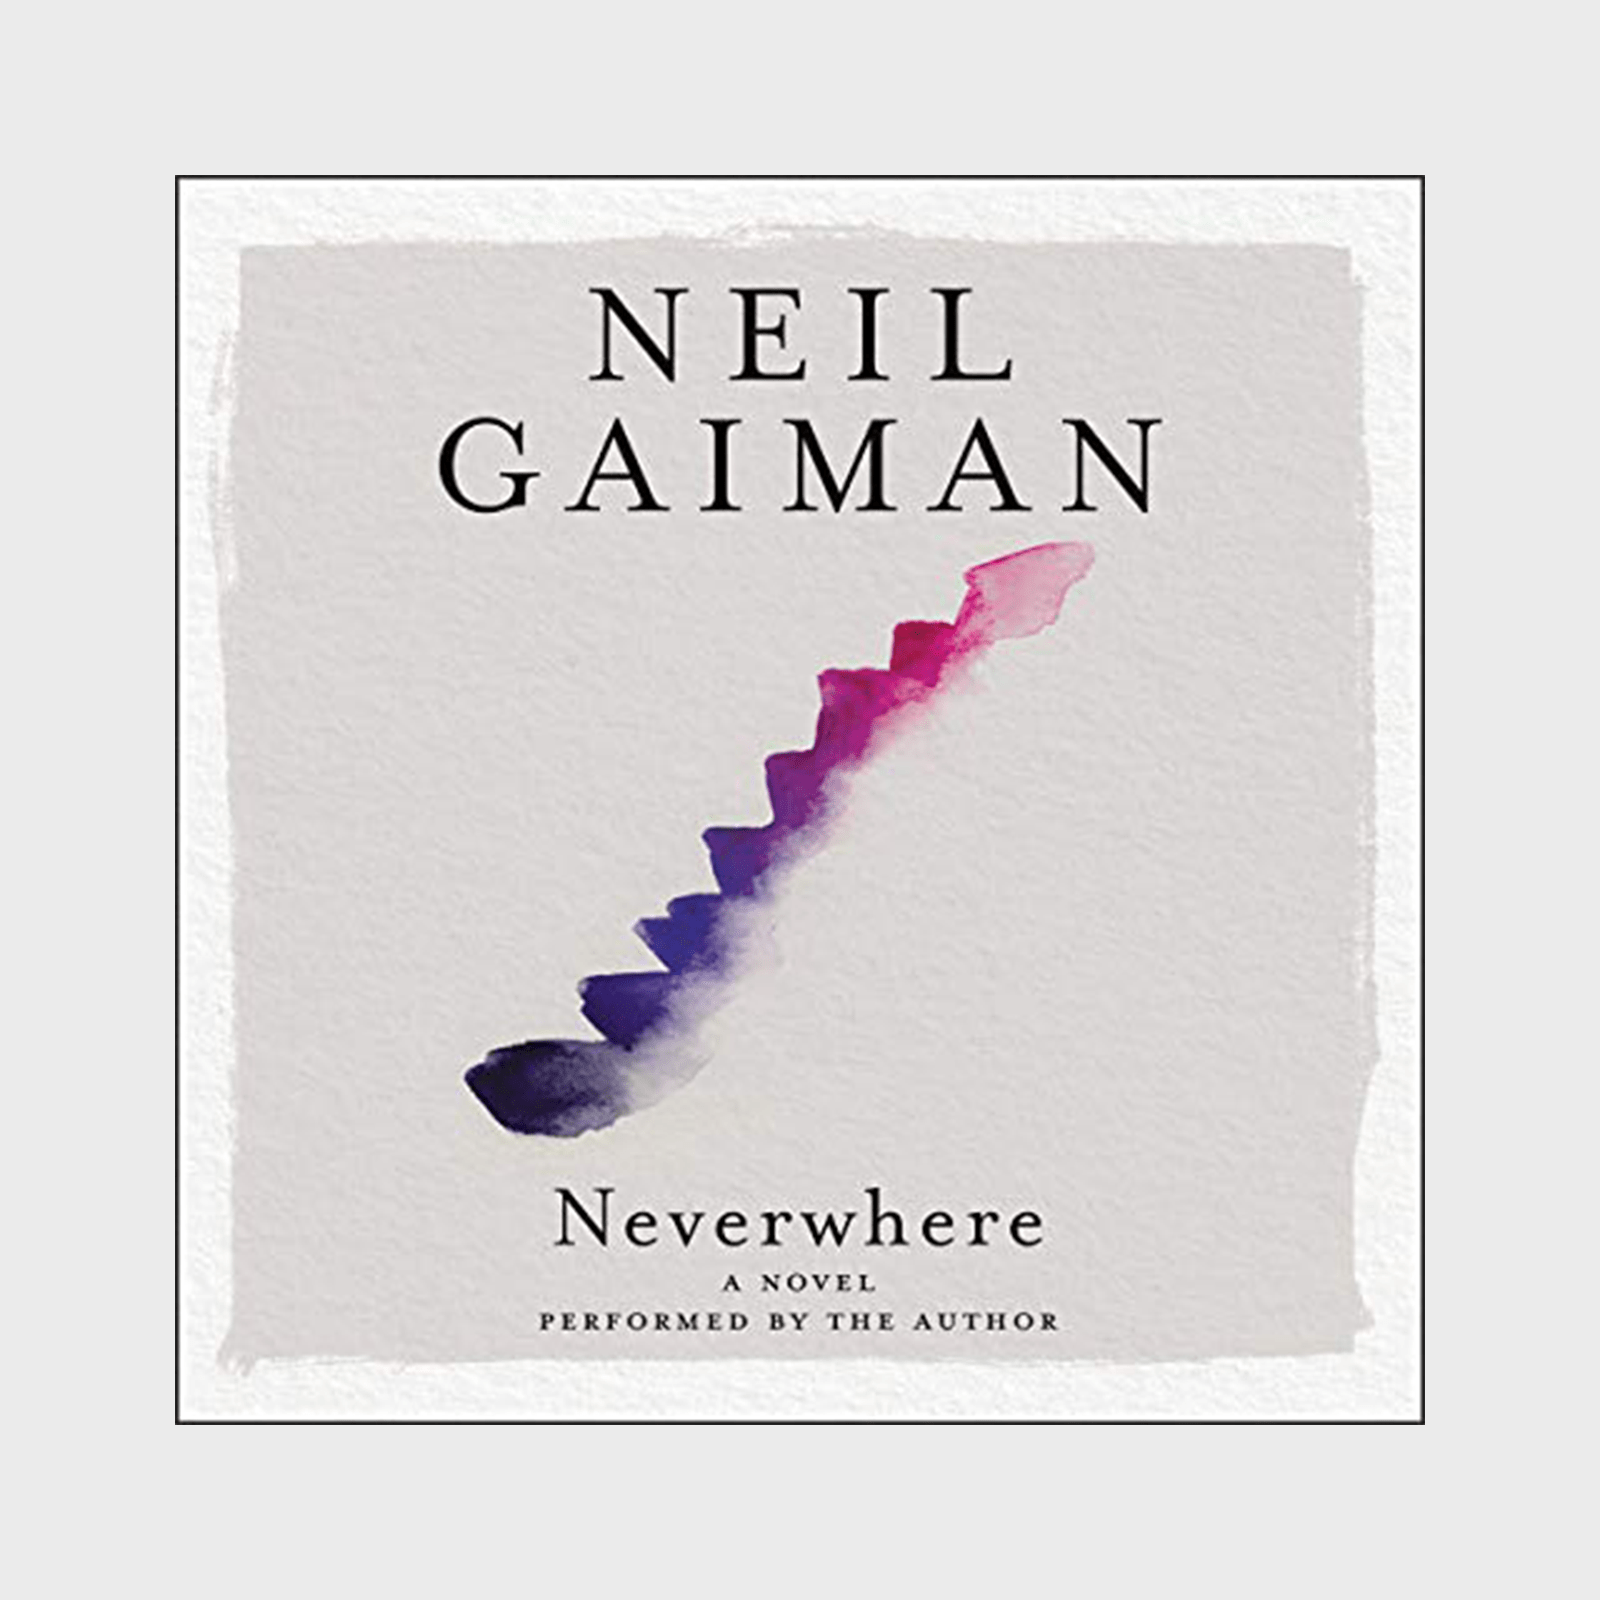 <h3><strong><em>Neverwhere </em>by Neil Gaiman</strong></h3> <p>This 1996 book, the <a href="https://www.amazon.com/Neverwhere-Neil-Gaiman-audiobook/dp/B000XSAXXS/" rel="noopener noreferrer">debut novel</a> of now-science-fiction-superstar Neil Gaiman, is one of NPR's Top 100 fantasy and <a href="https://www.rd.com/list/science-fiction-books/" rel="noopener noreferrer">science-fiction books</a> of all time. When a young man stops to help a girl on the streets of London, he inadvertently becomes invisible, losing his life as he knows it while getting pulled into the alternate, magical world of the London Below. This supernatural British tale is sure to captivate you while its read out loud by the author himself.</p> <p class="listicle-page__cta-button-shop"><a class="shop-btn" href="https://www.amazon.com/Neverwhere-Neil-Gaiman-audiobook/dp/B000XSAXXS/">Shop Now</a></p>